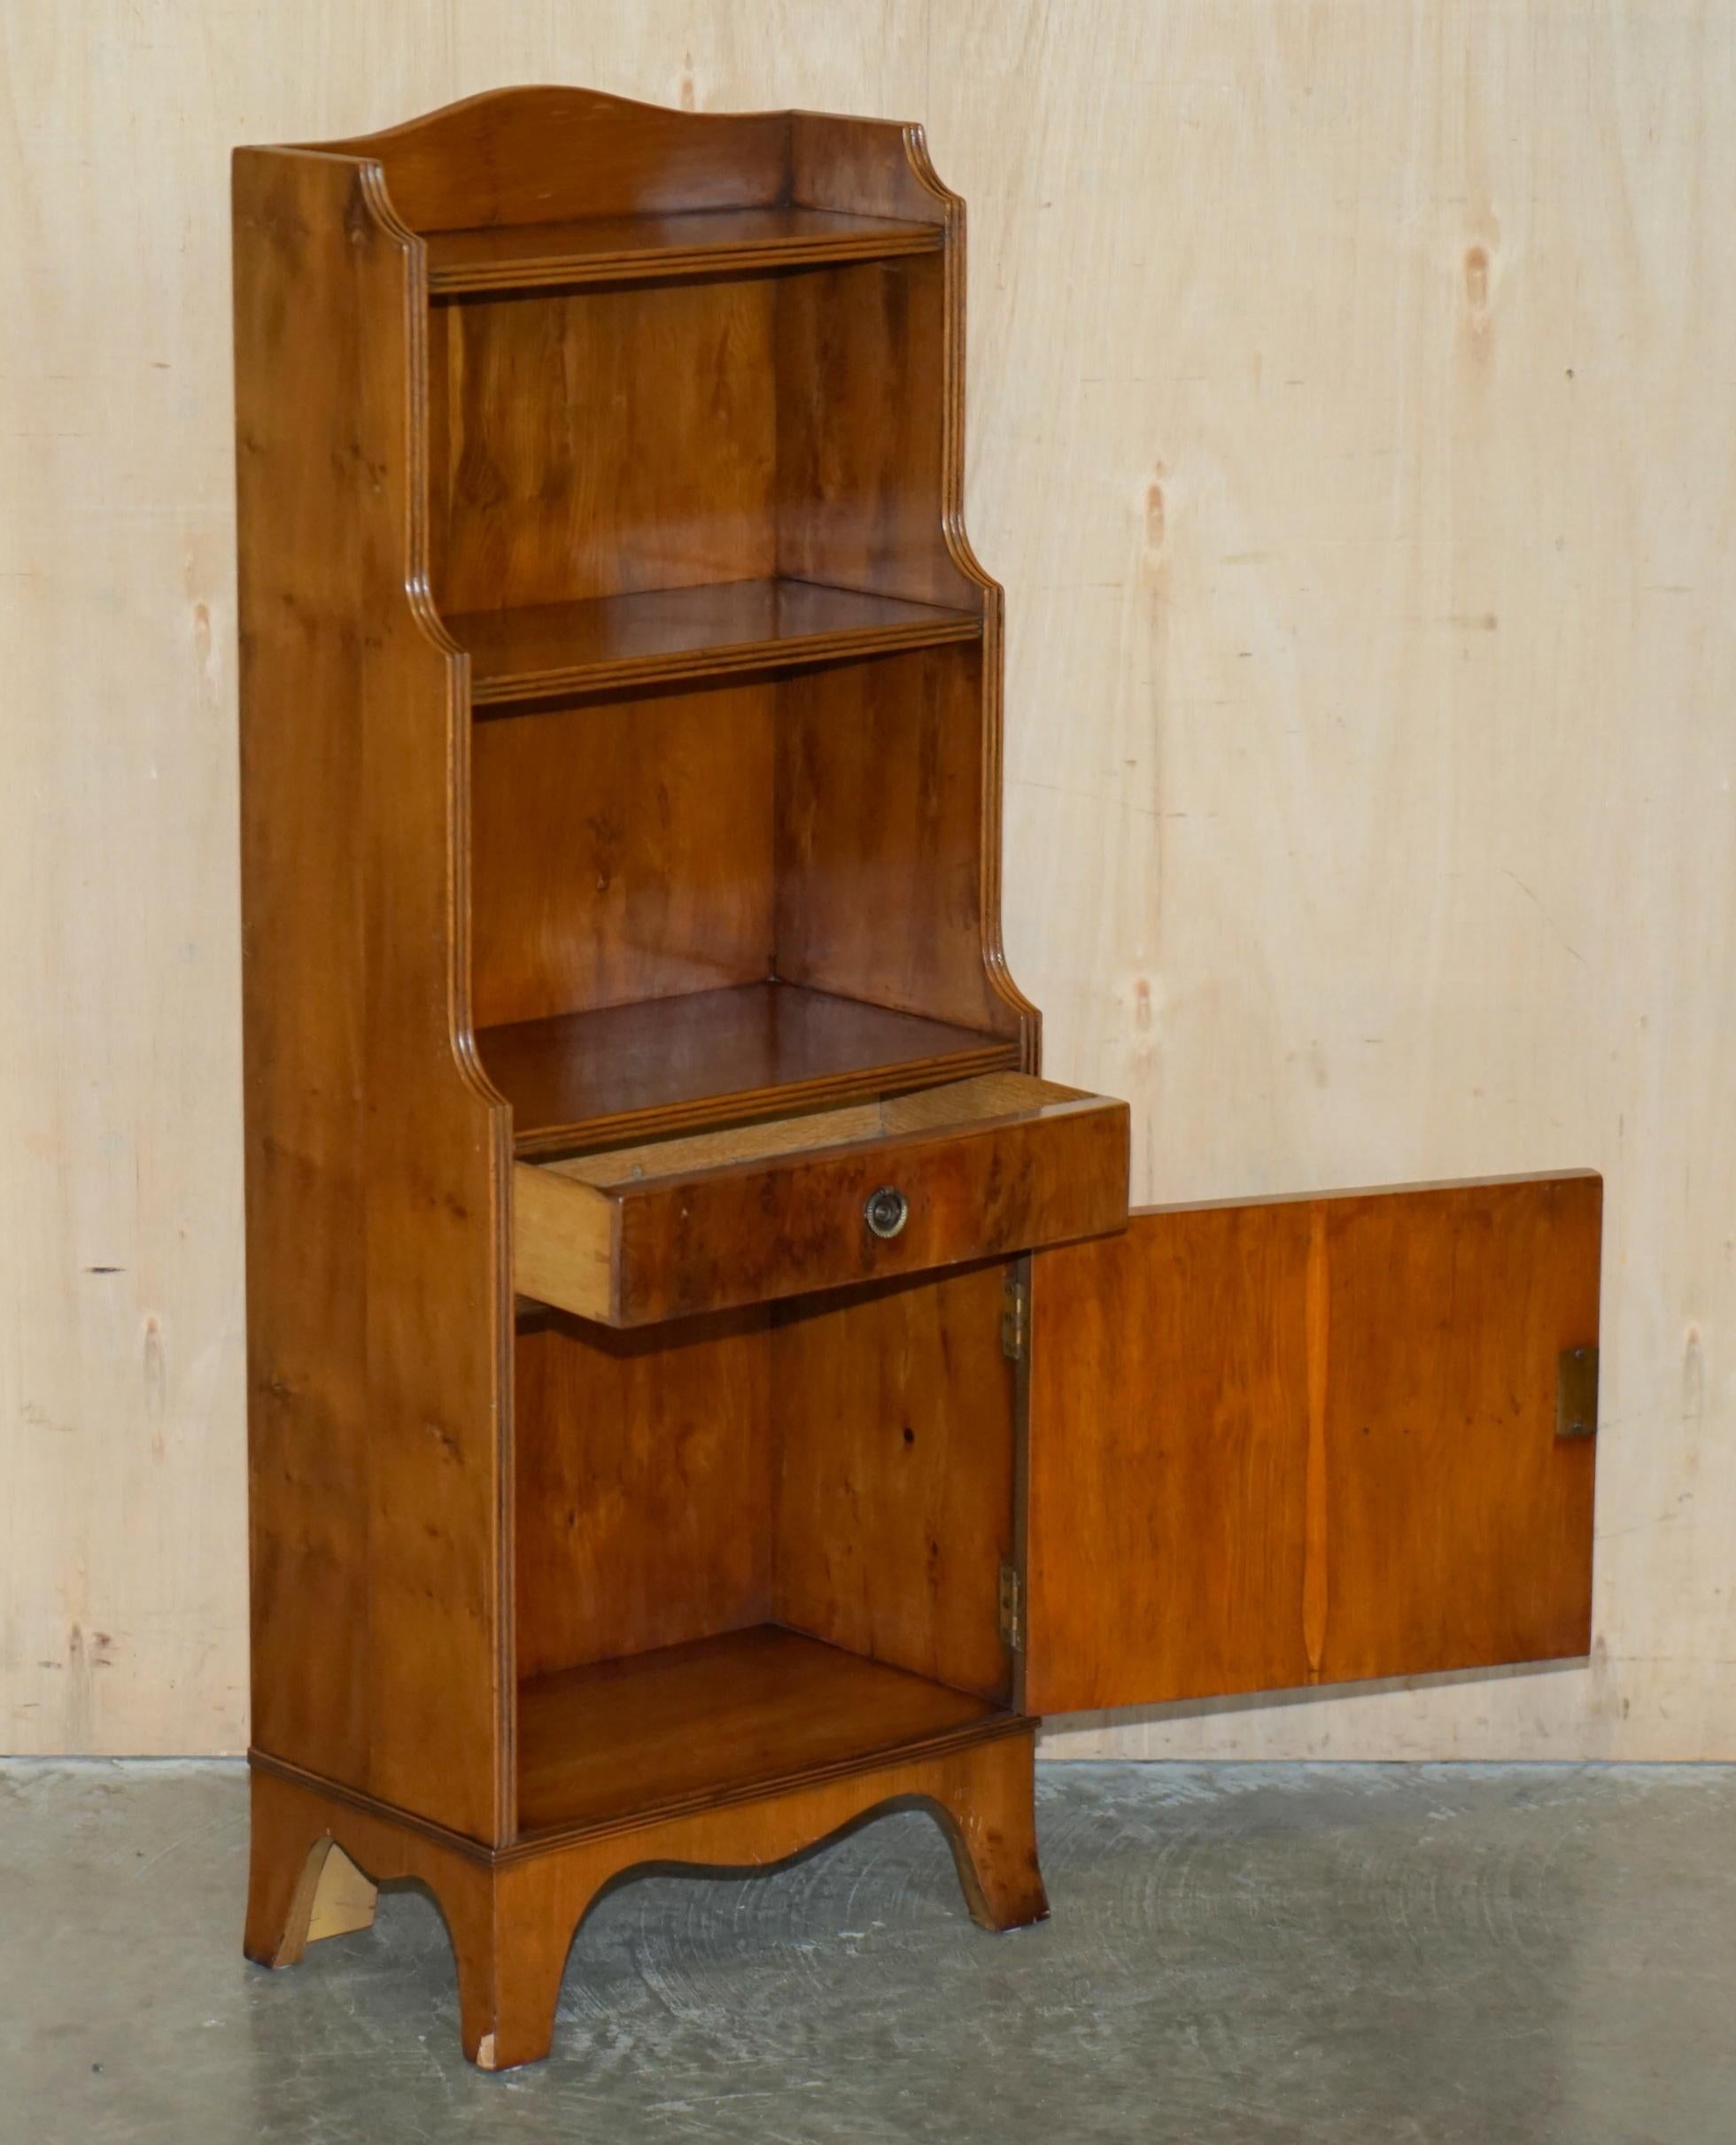 PAIR OF ViNTAGE ENGLISH FLAMED HARDWOOD WATERFALL BOOKCASES WITH CUPBOARD BASES For Sale 4